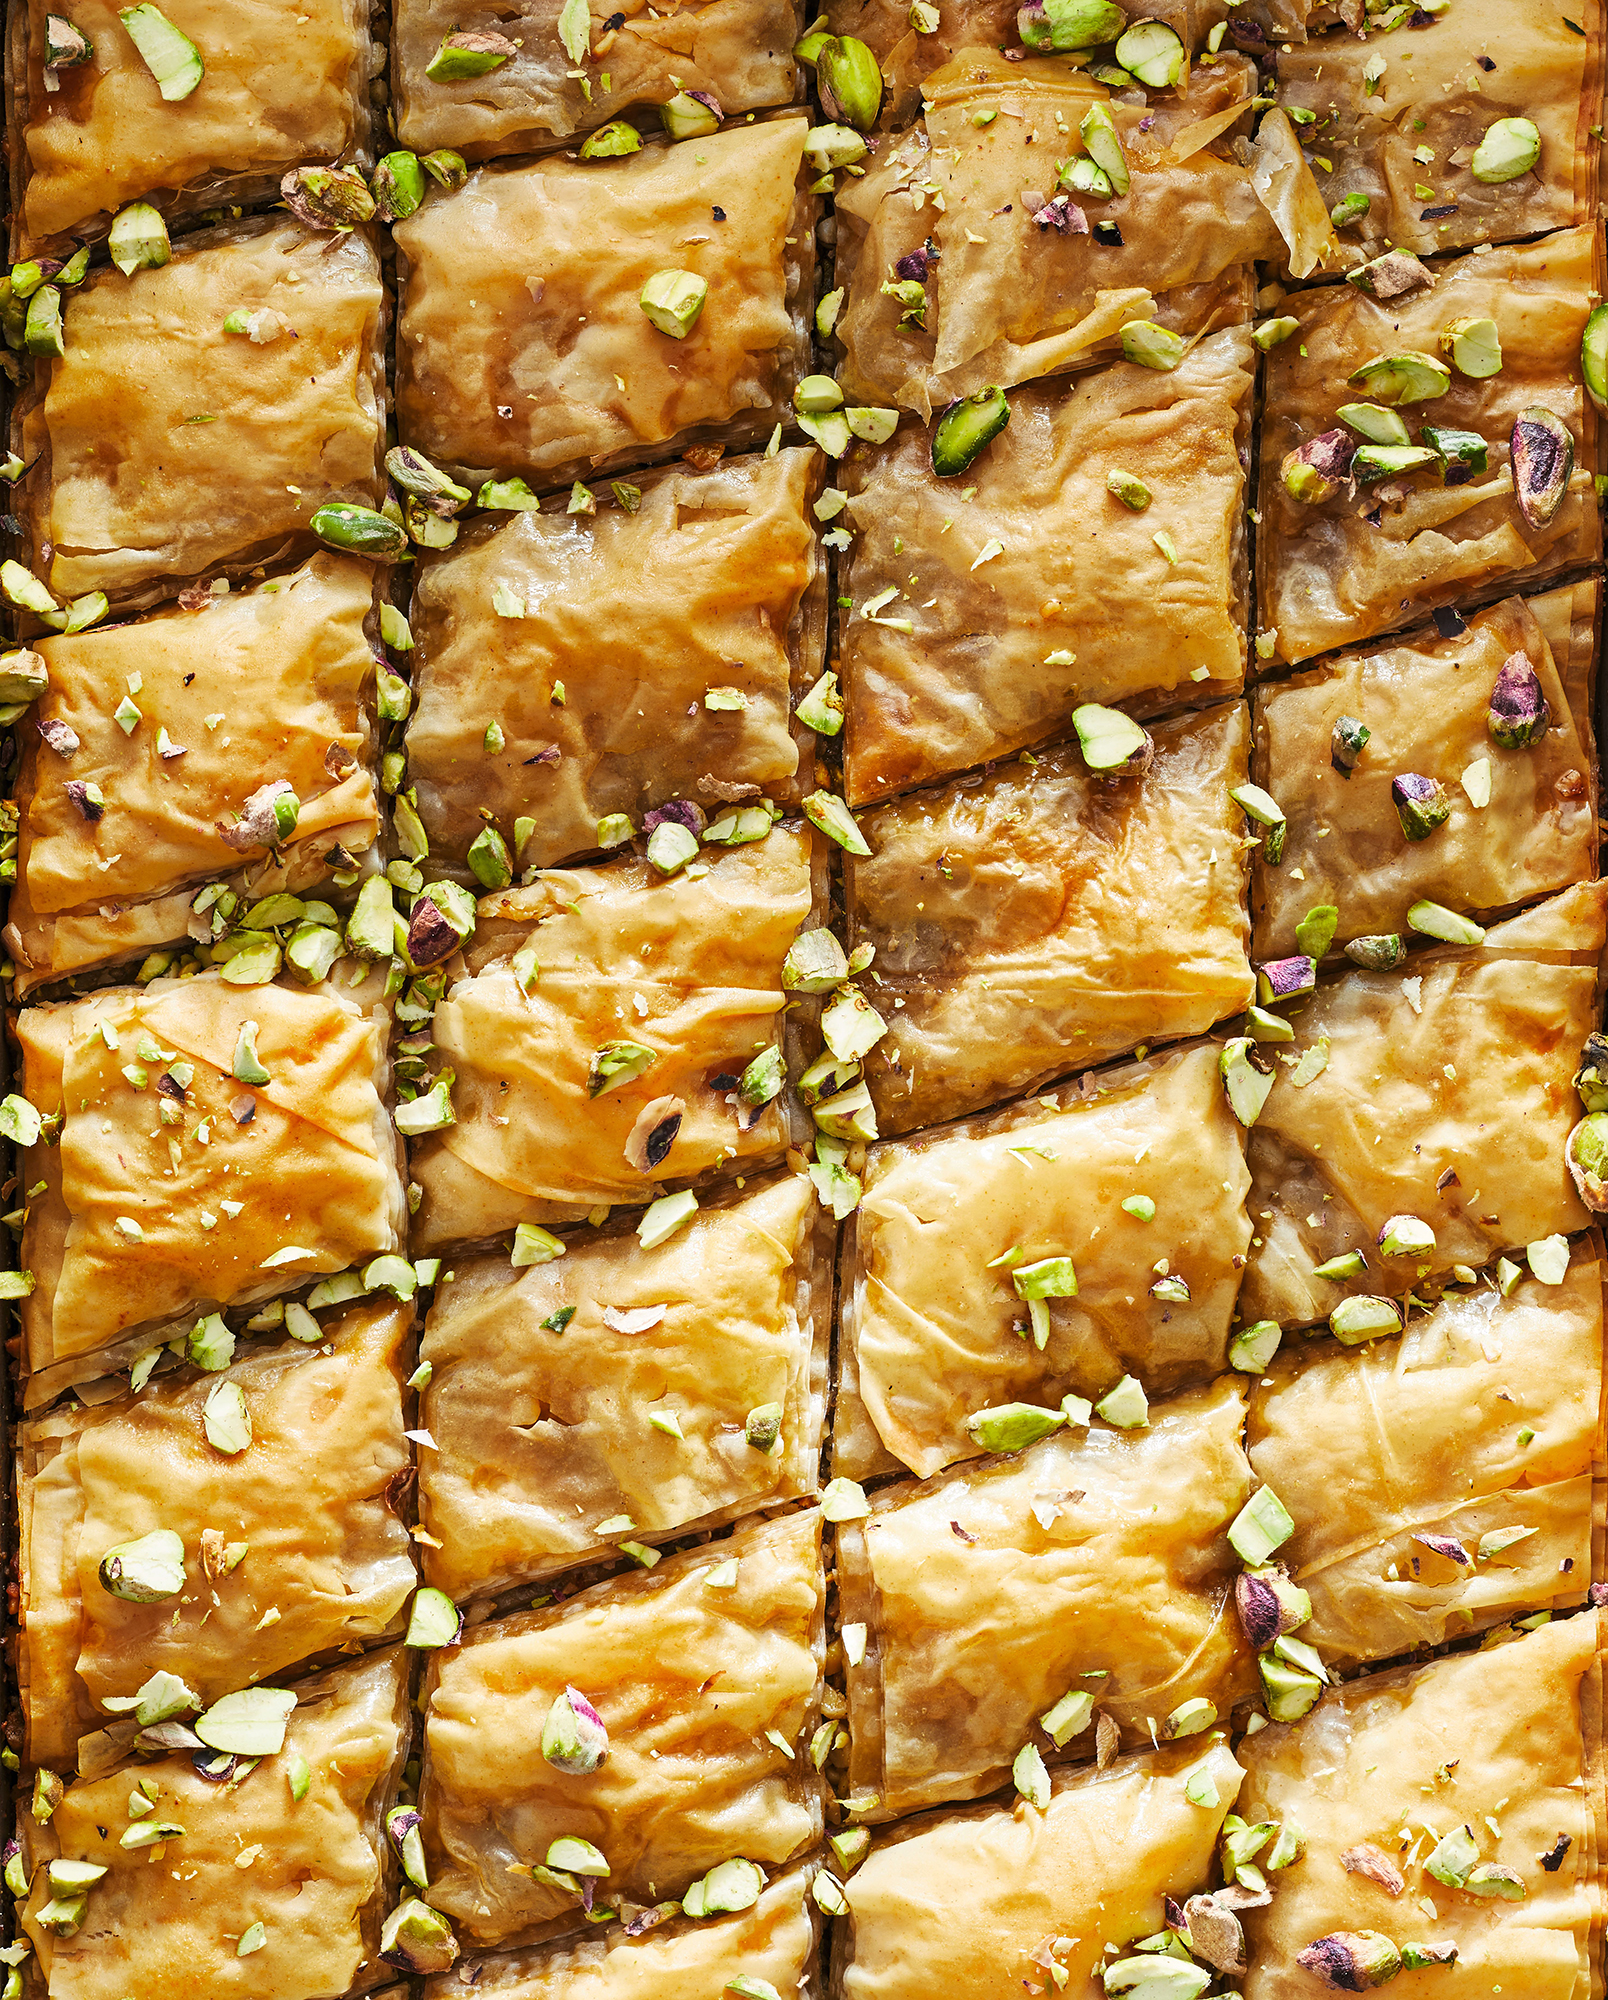 Triple Nutty Baklava, from “The Mediterranean Dish” by Suzy Karadsheh (Clarkson Potter, $32.50), contains pistachios, walnuts and hazelnuts. (Courtesy of Caitlin Bensel)